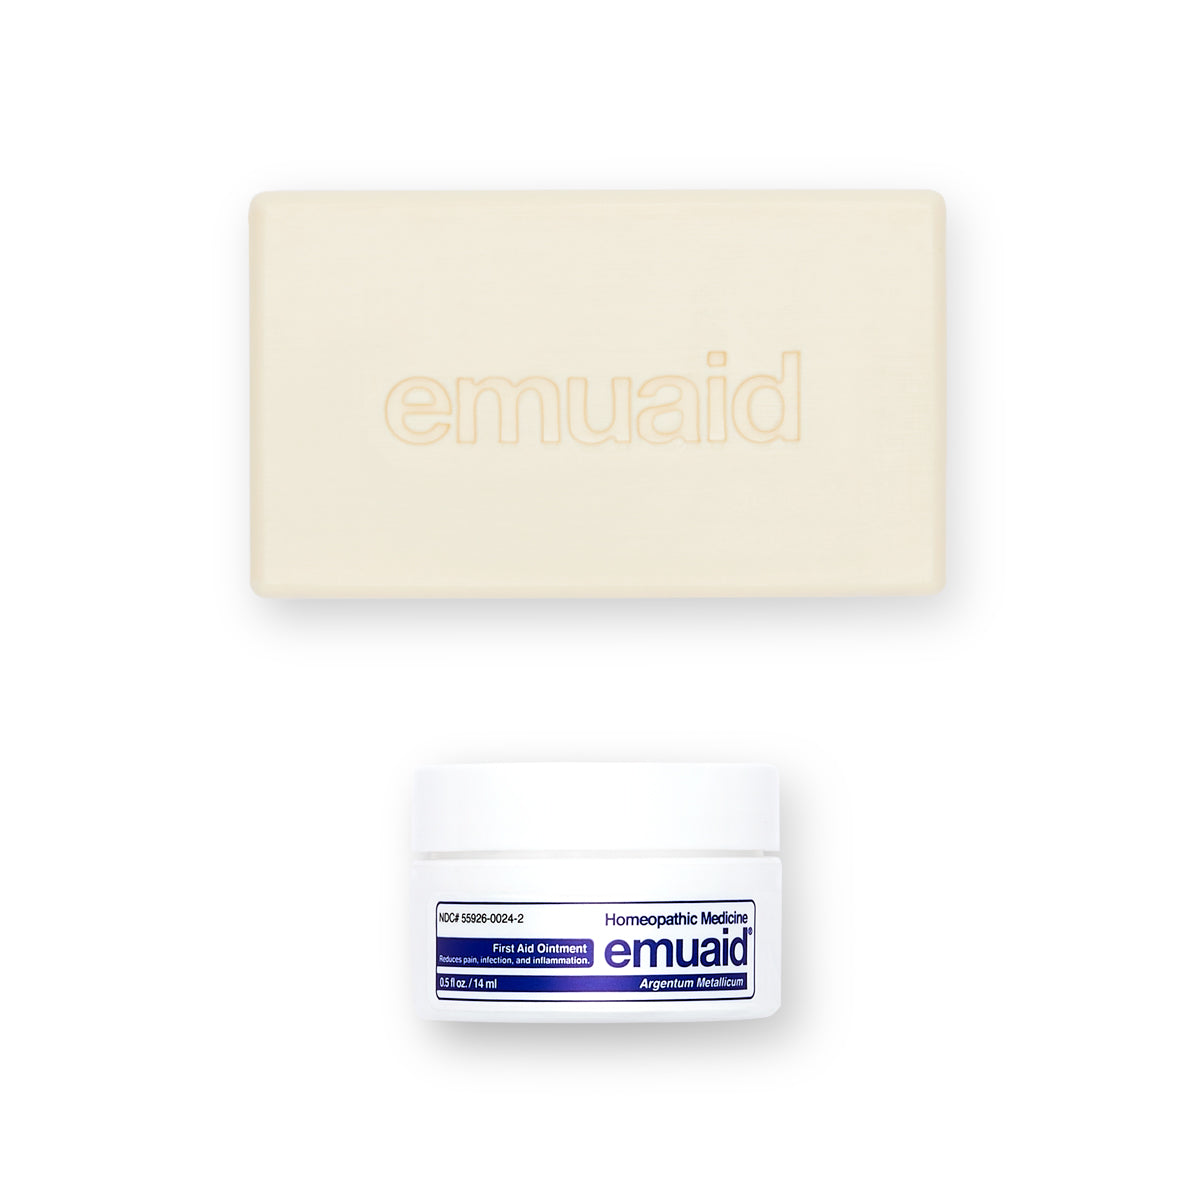 This is a picture of the EMUAID® Regular First Aid Ointment 0.5oz and the EMUAID® Therapeutic Moisture Bar.  